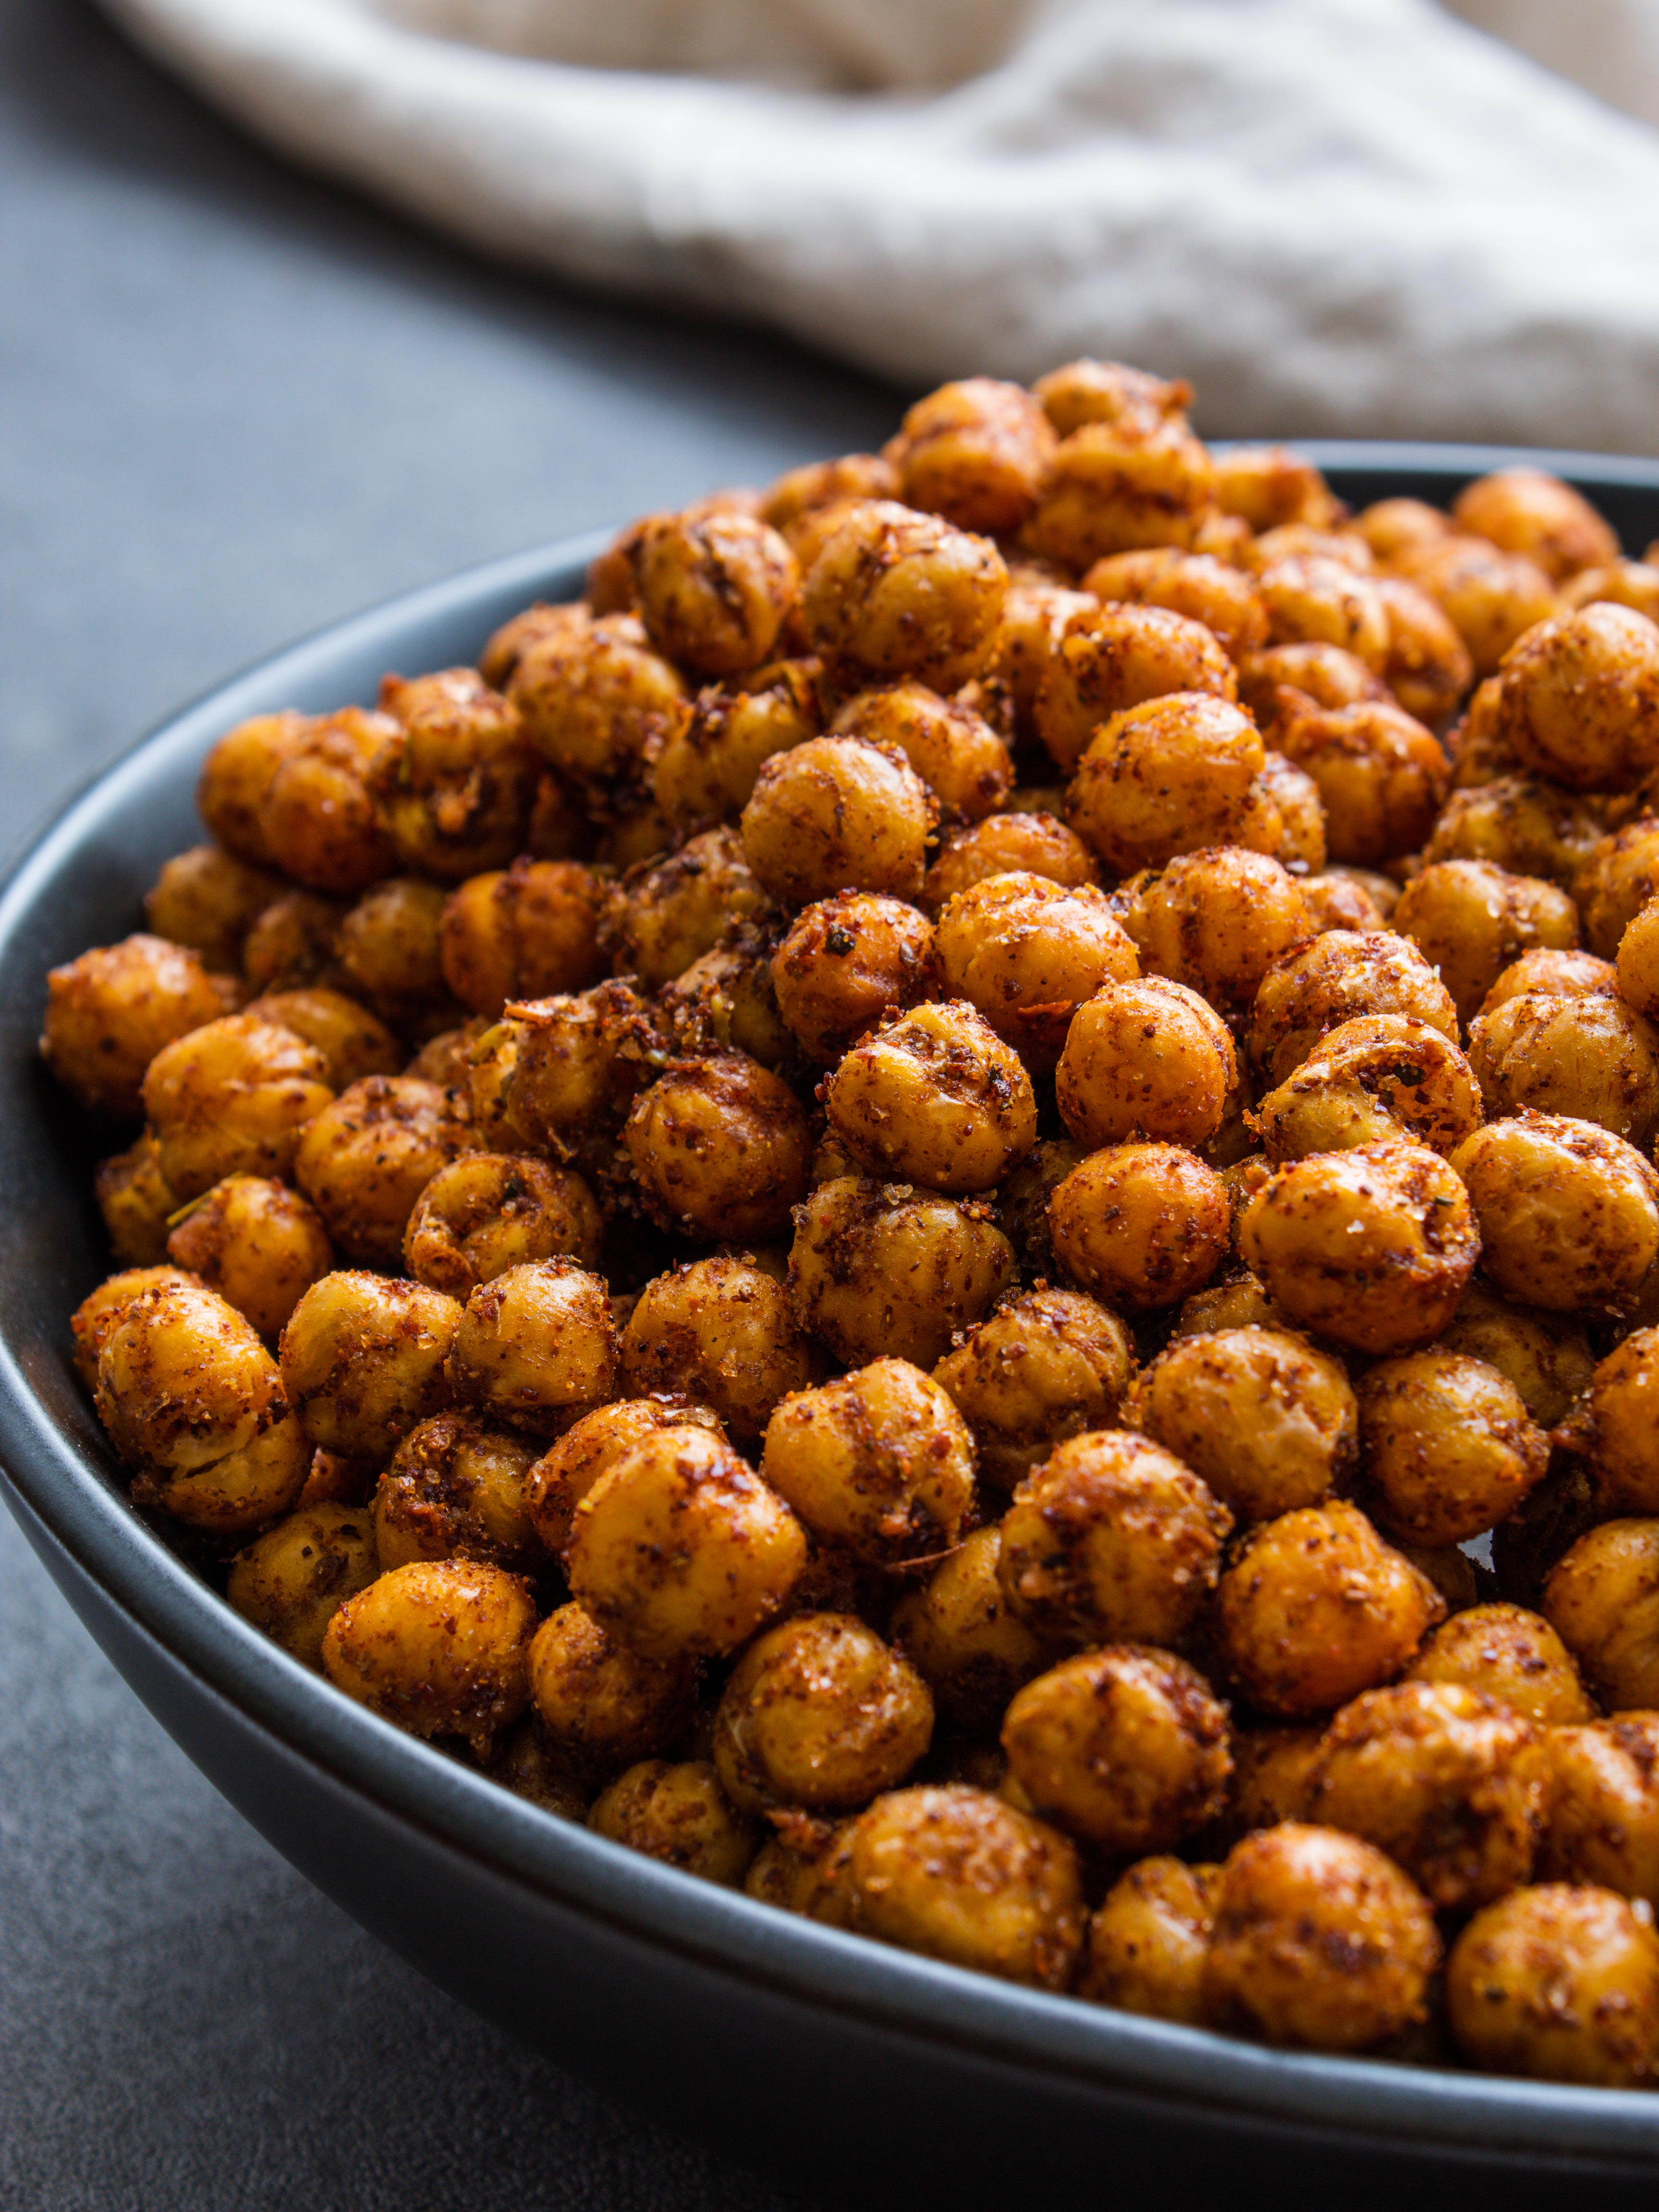 a black bowl full of crunchy air fryer chickpeas coated in Mediterranean spices